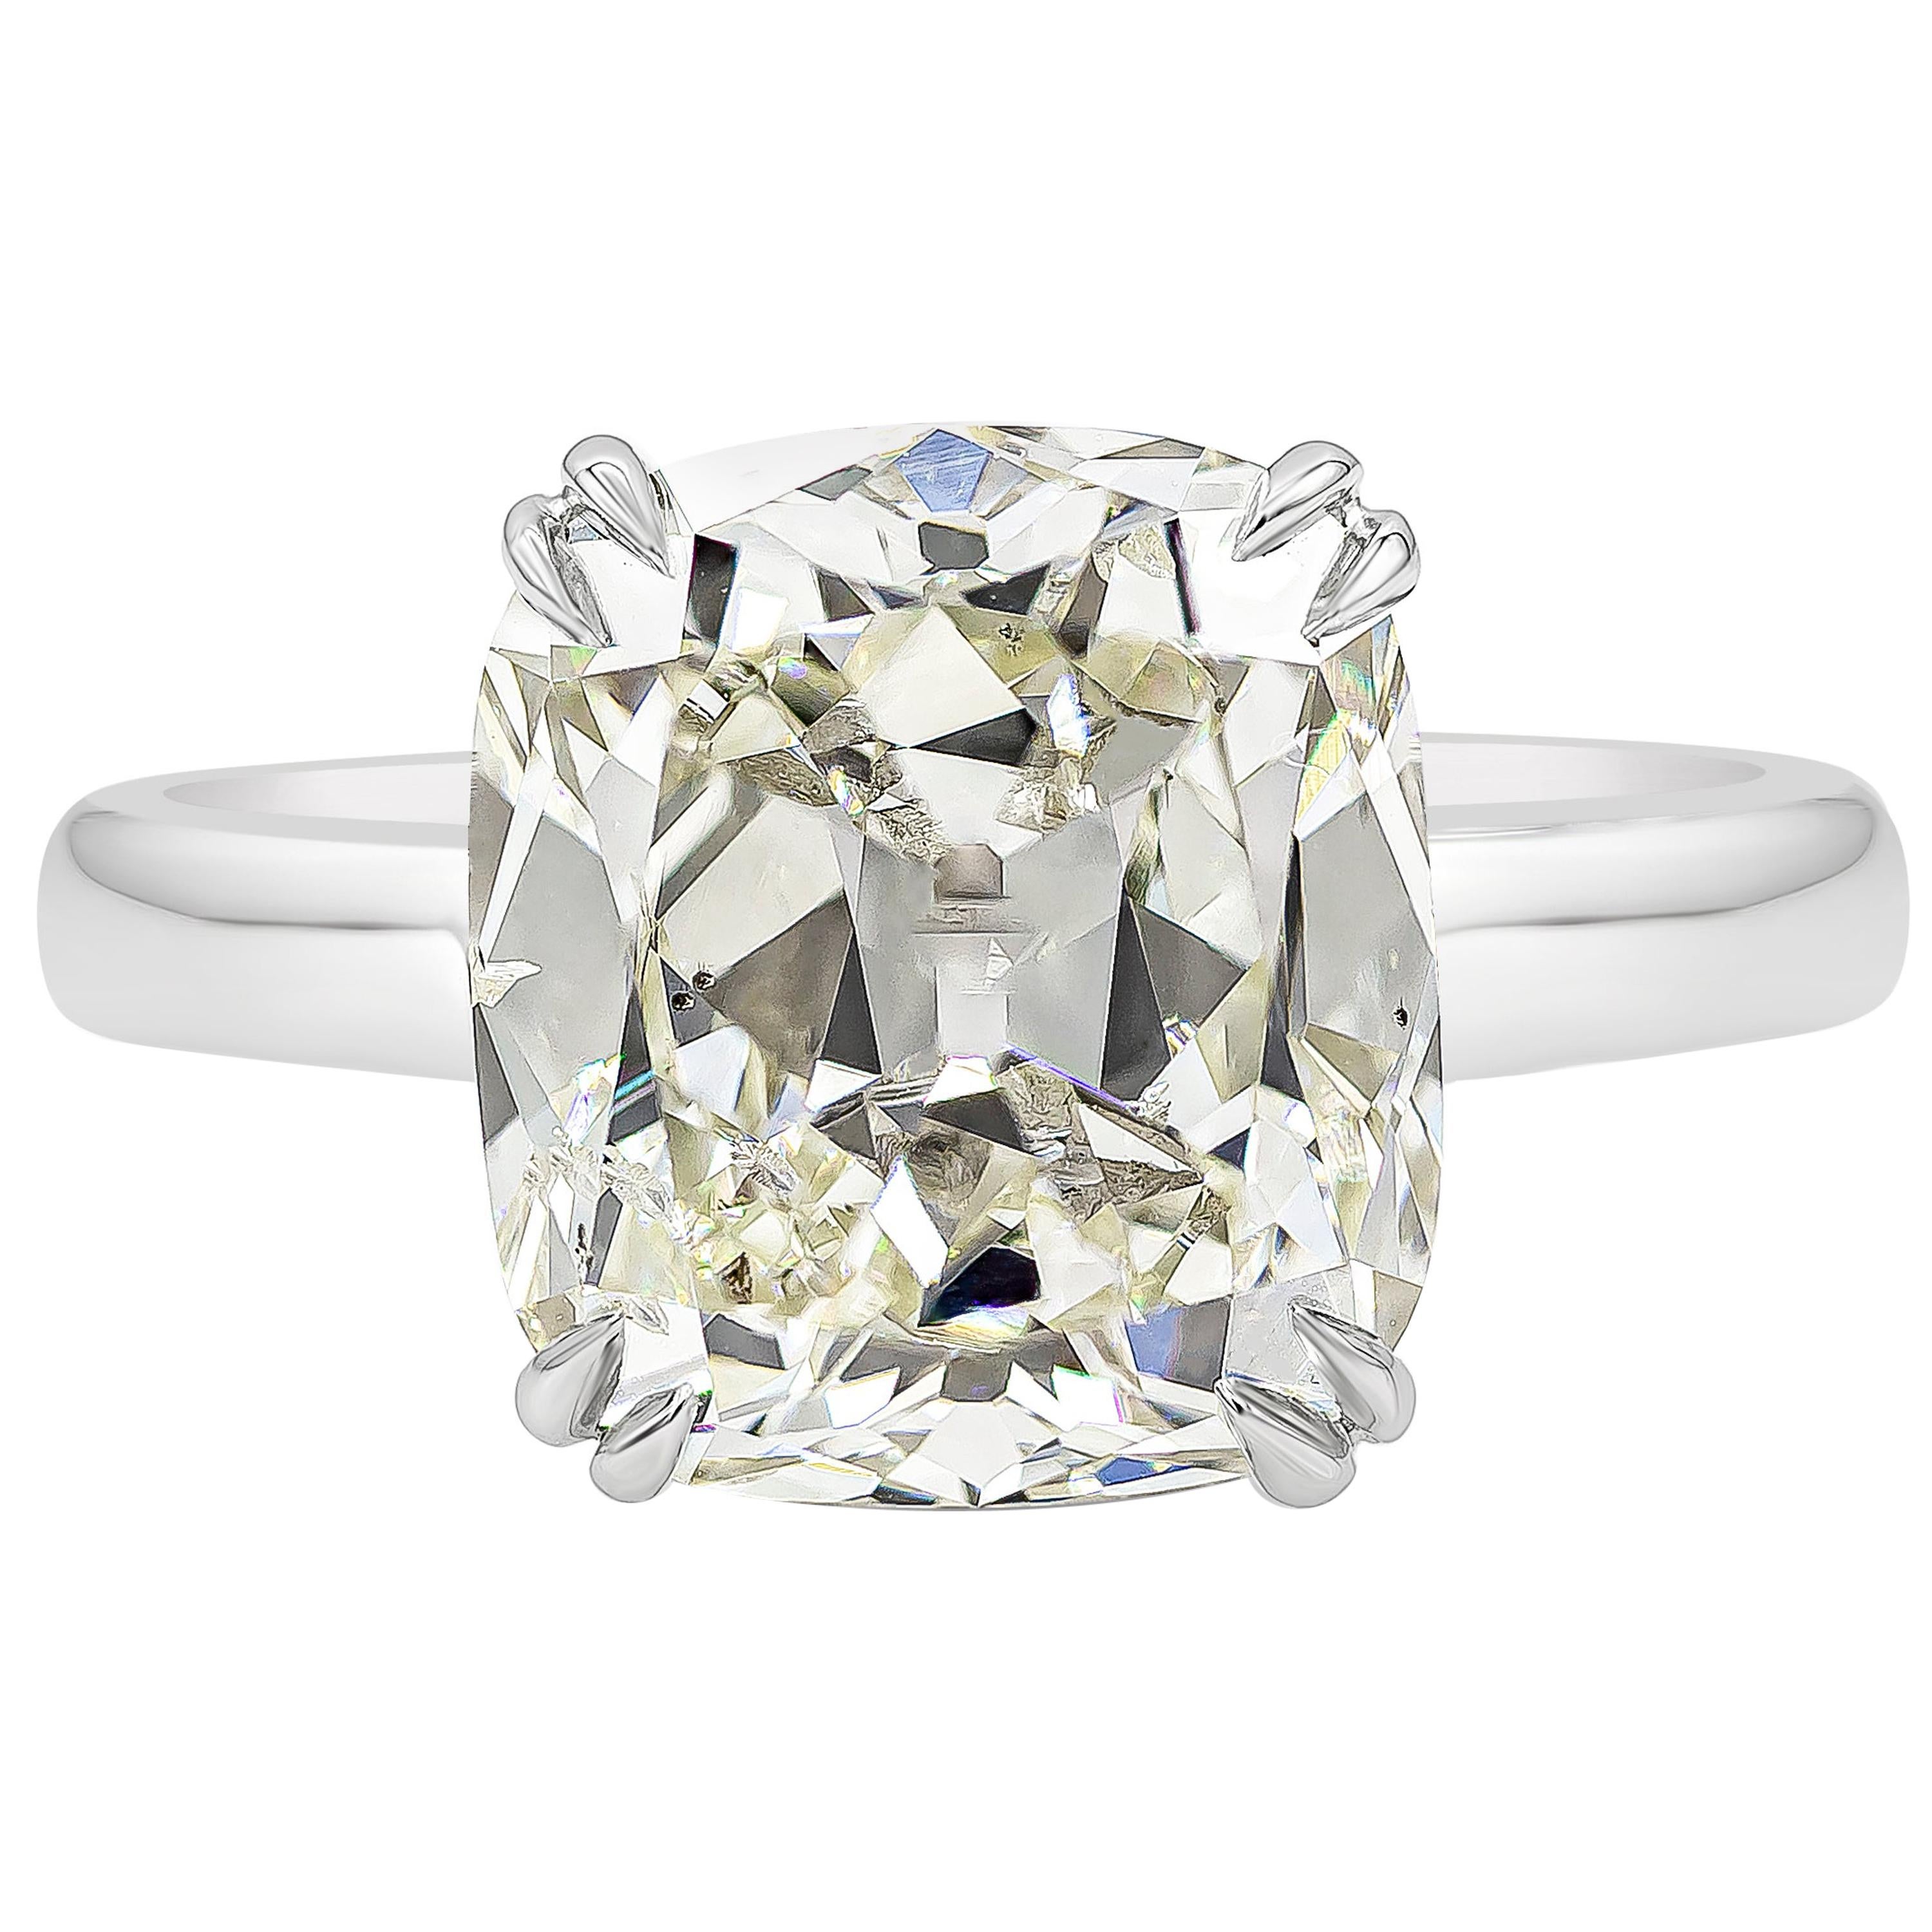 GIA Certified 5.53 Carat Cushion Cut Diamond Solitaire Engagement Ring